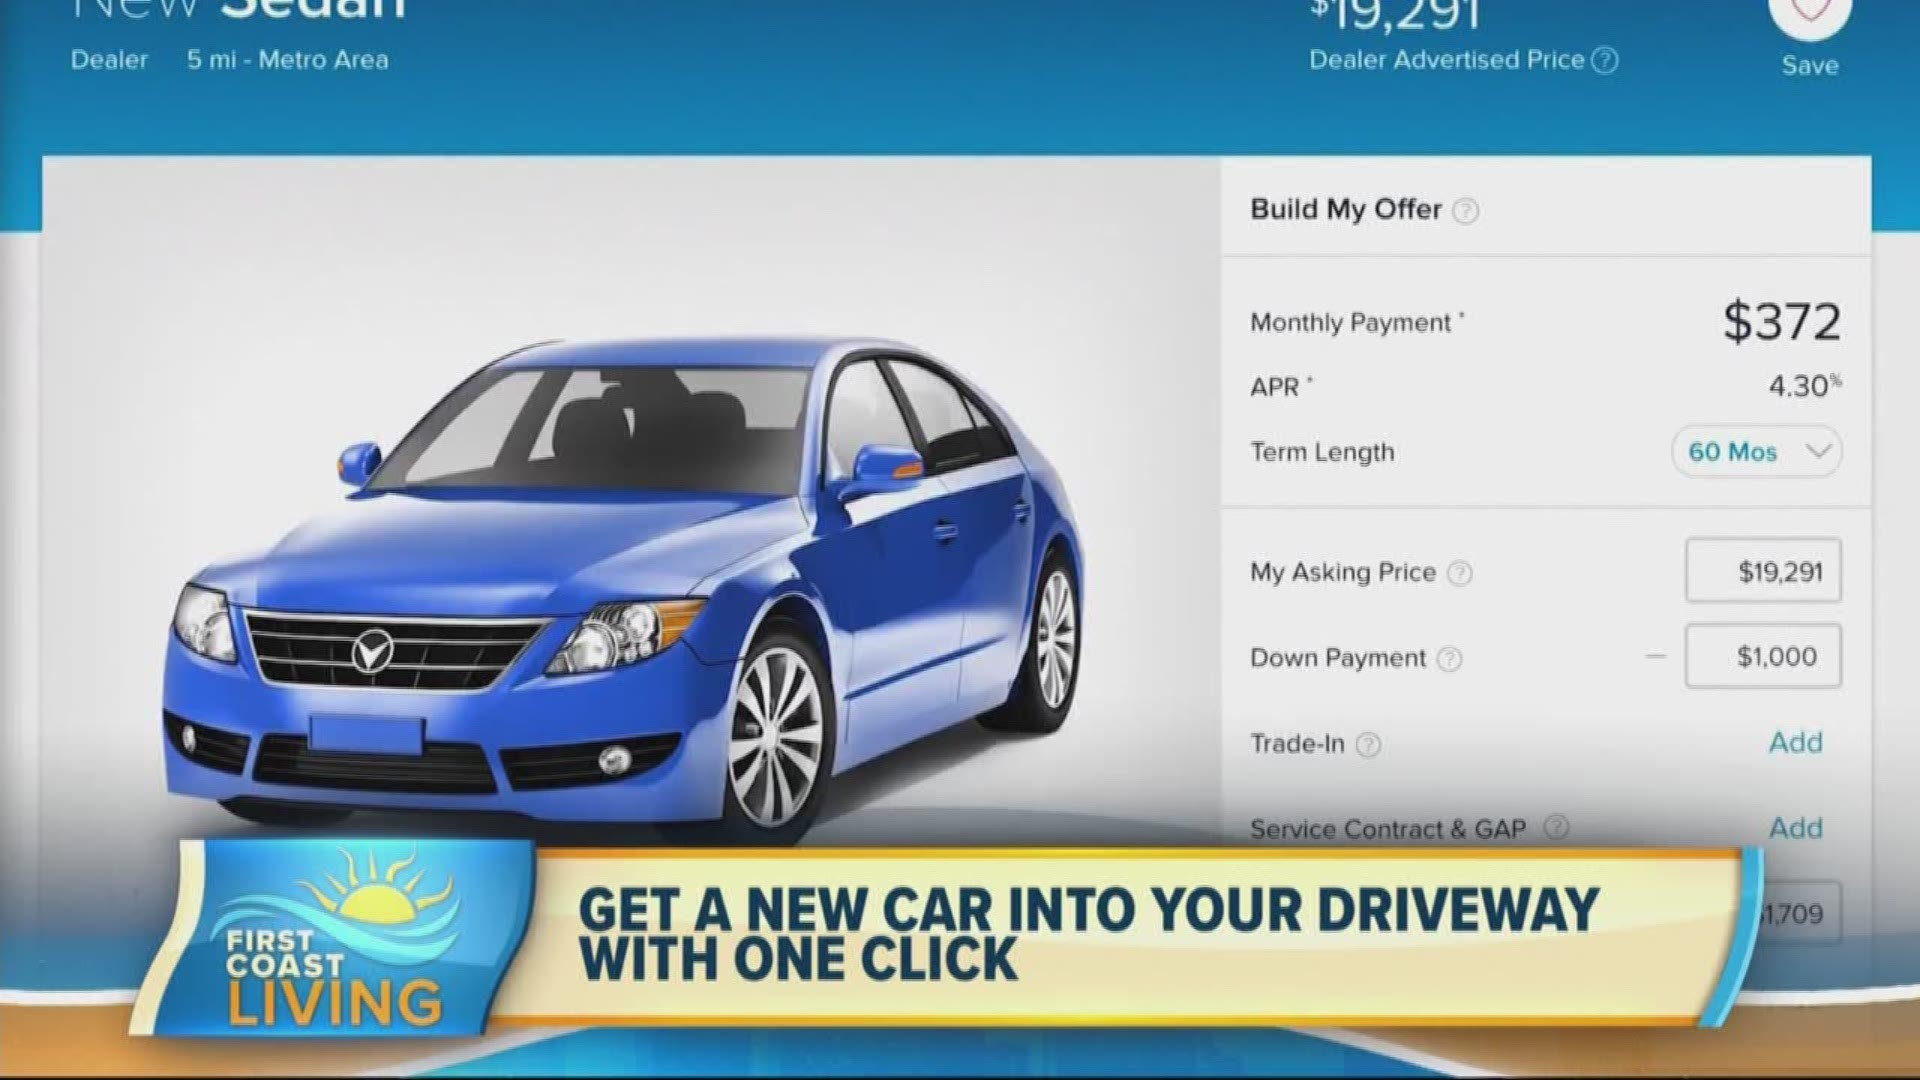 An automotive expert shares the details of a new app that helps take all the stress out of the car buying process.